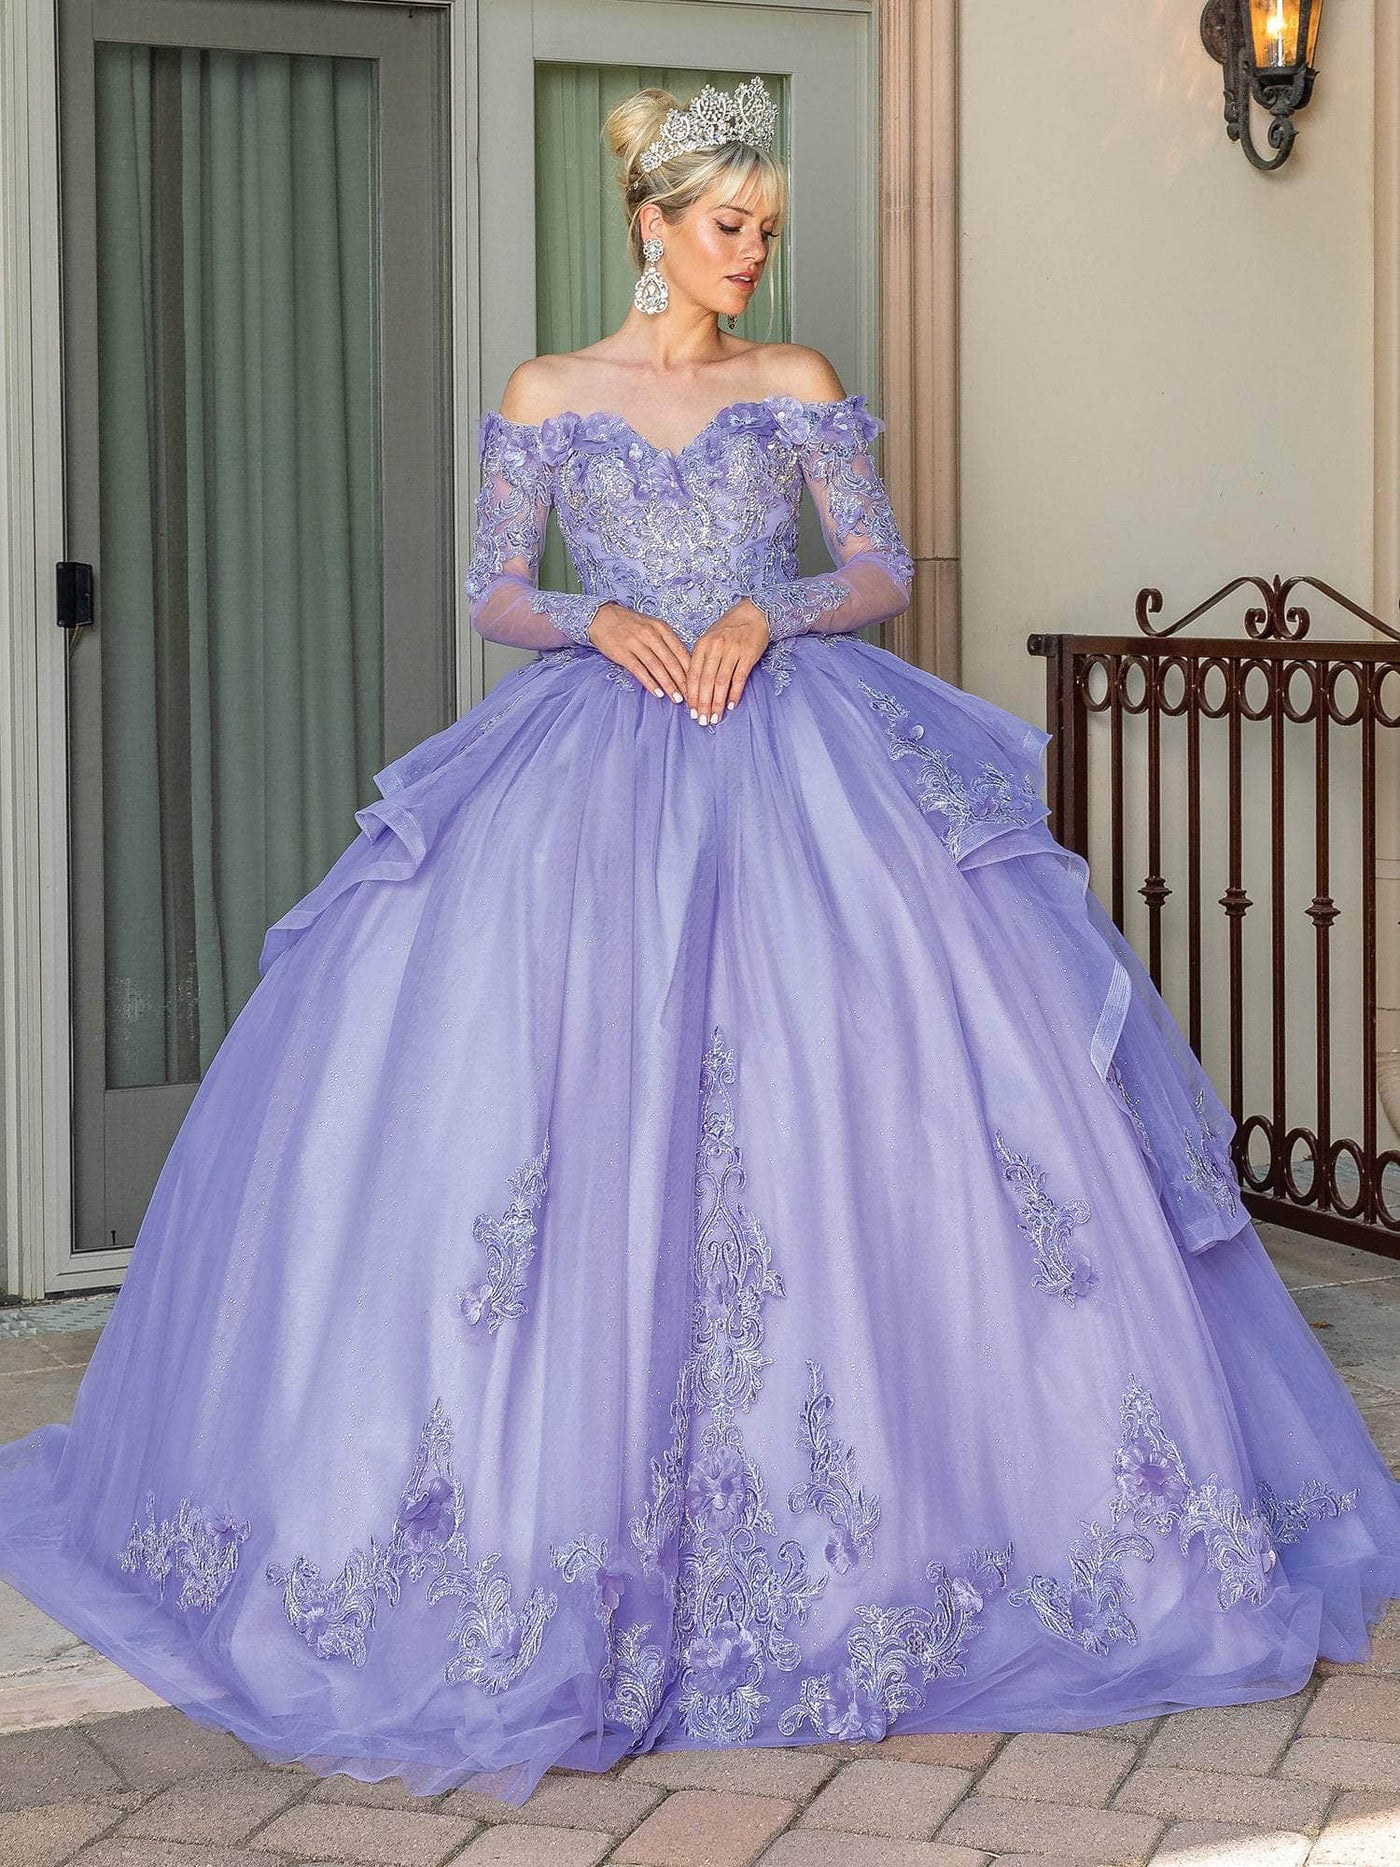 Dancing Queen 1667 - Long Sleeve Quinceanera Ballgown Special Occasion Dress